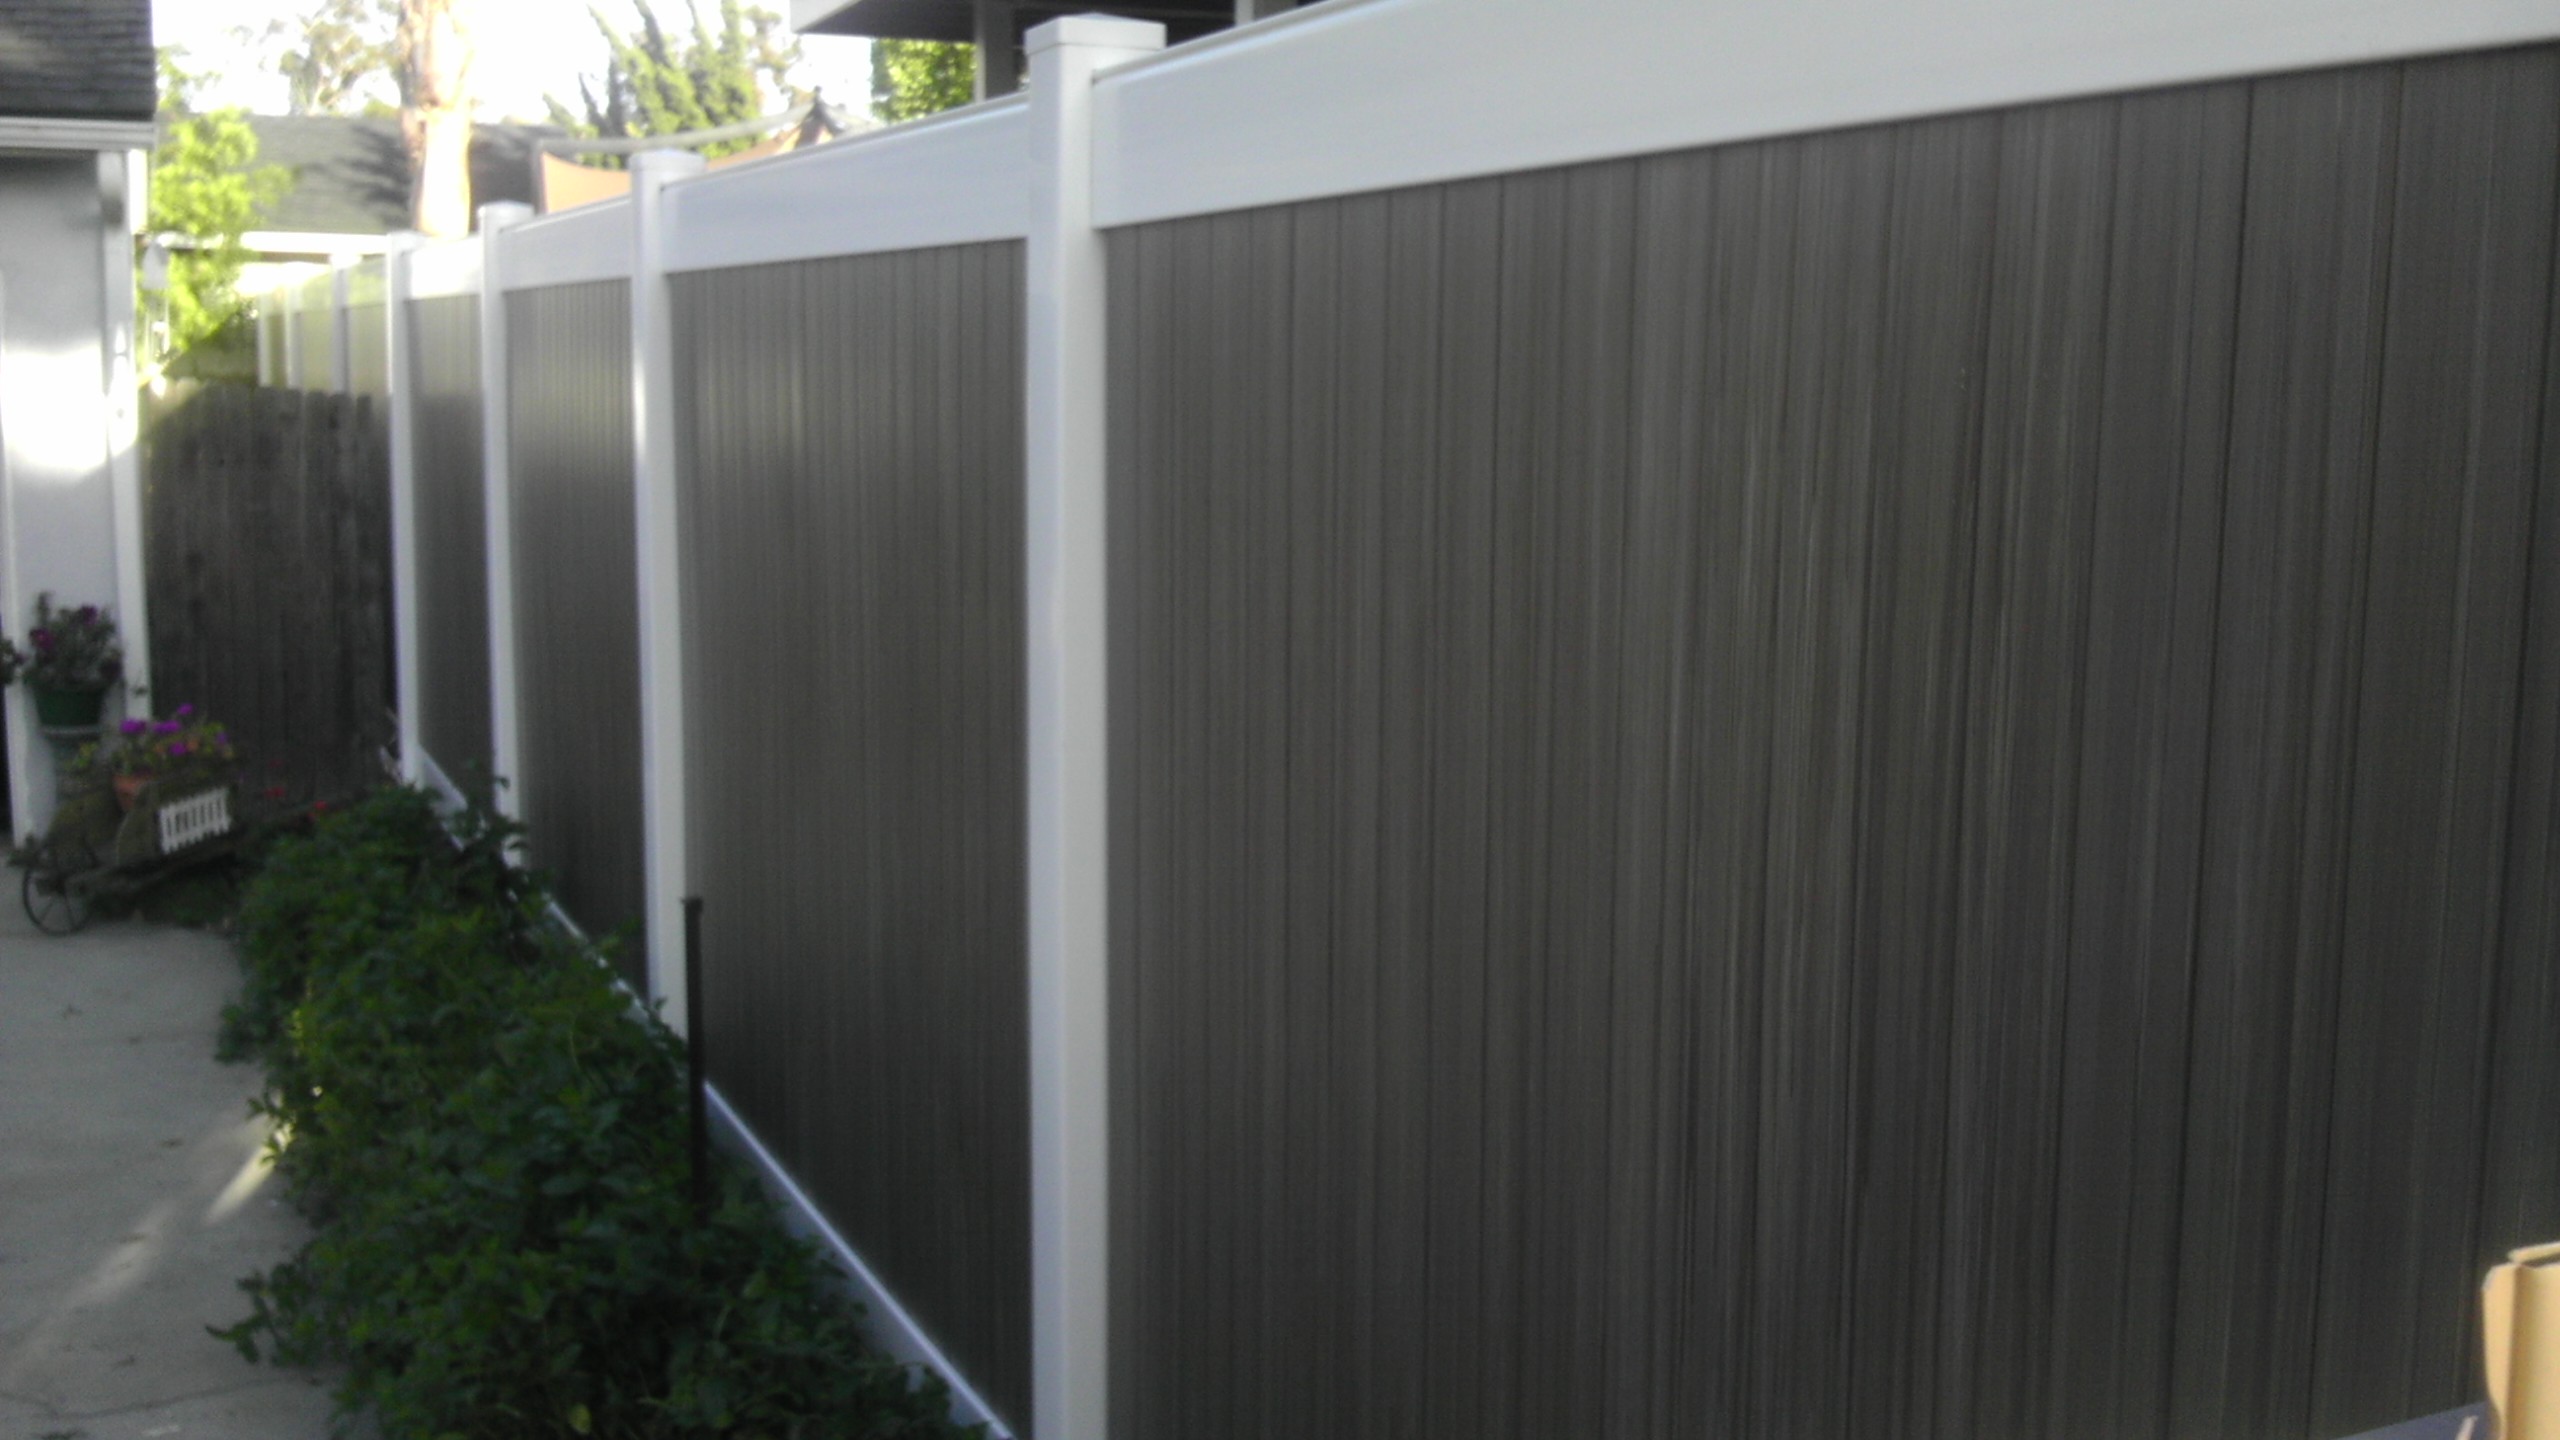 wood fences contractor in orange county - the fencing pro